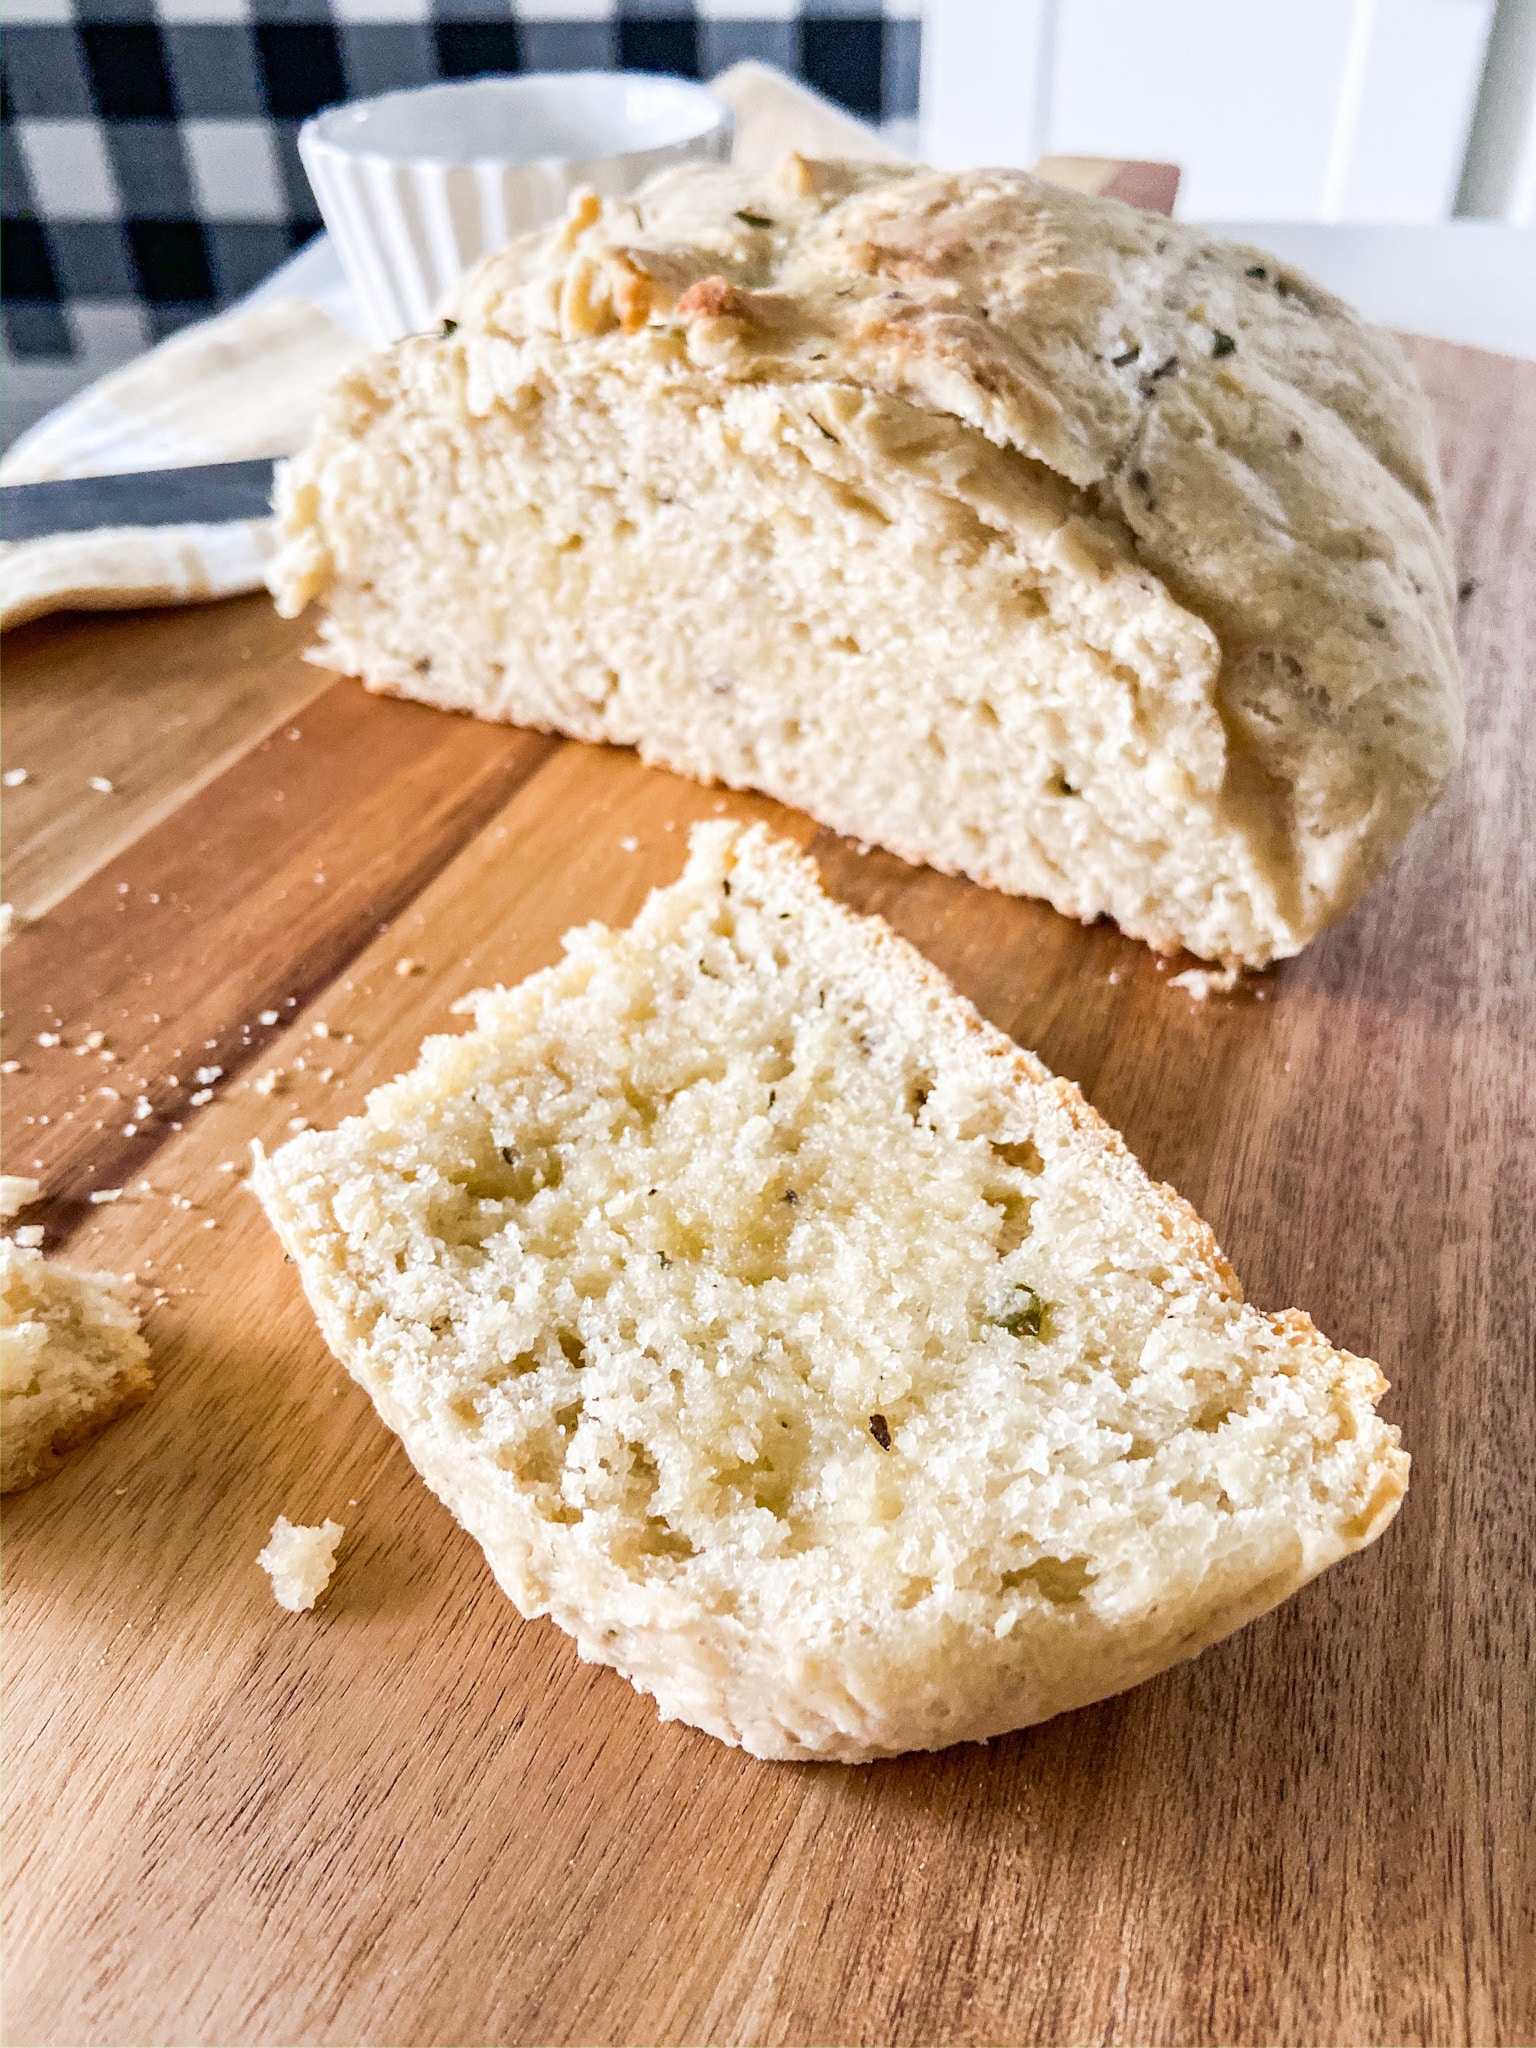 Instant Pot No-Knead Herb Bread. Save time by using your Instant Pot to proof this soft and flavorful bread with a crunchy crust. You'll never want to buy supermarket bread again! 